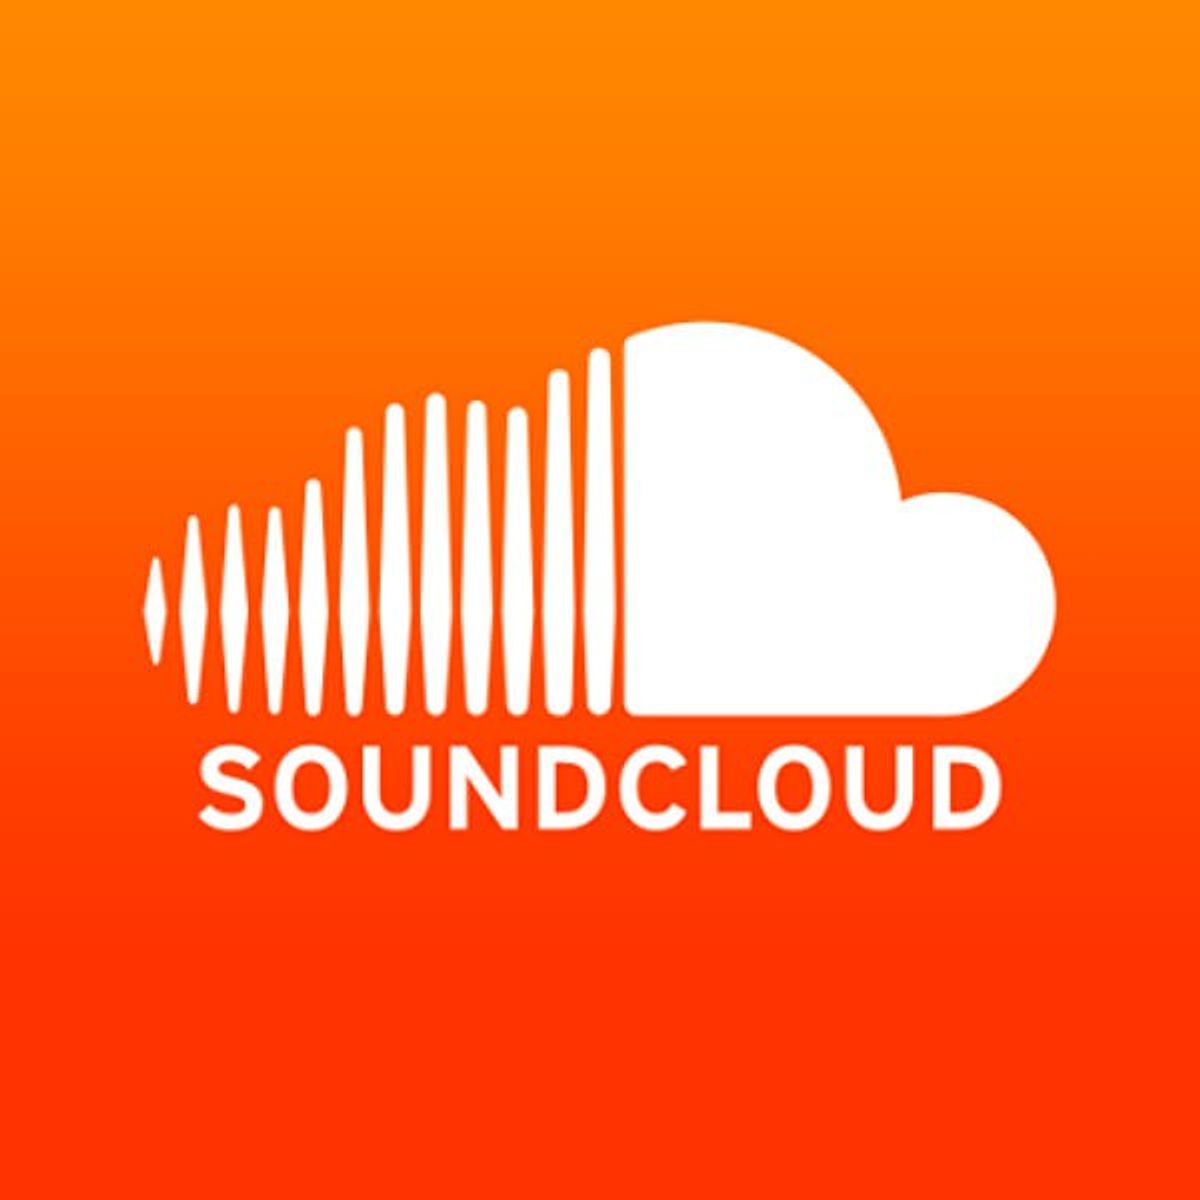 11 Songs to Check Out on SoundCloud